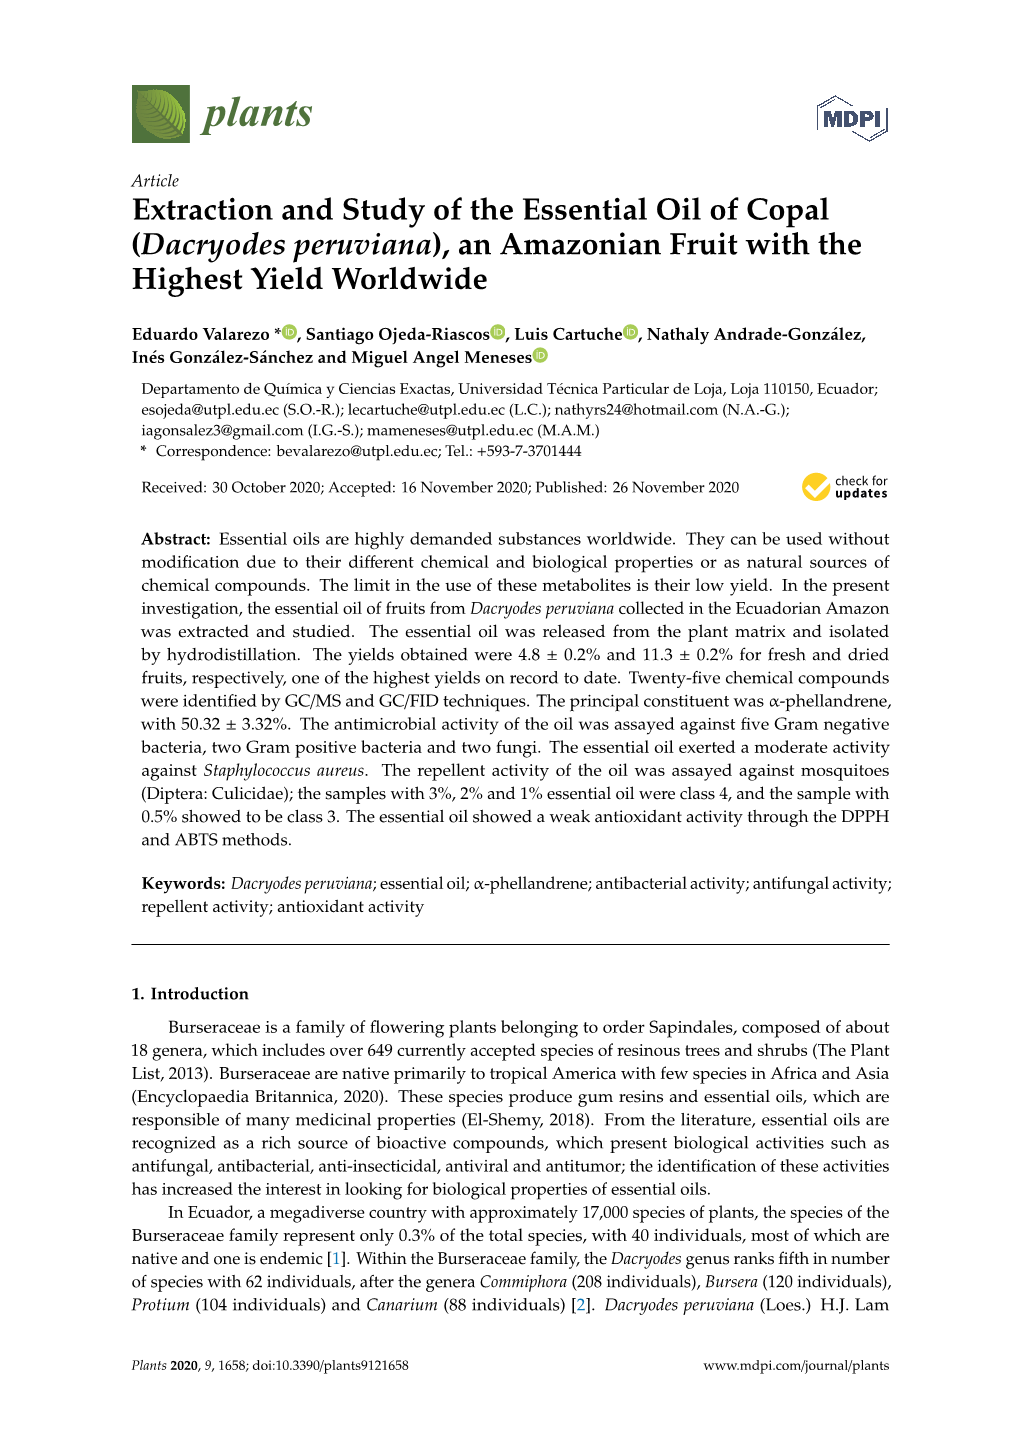 Extraction and Study of the Essential Oil of Copal (Dacryodes Peruviana), an Amazonian Fruit with the Highest Yield Worldwide